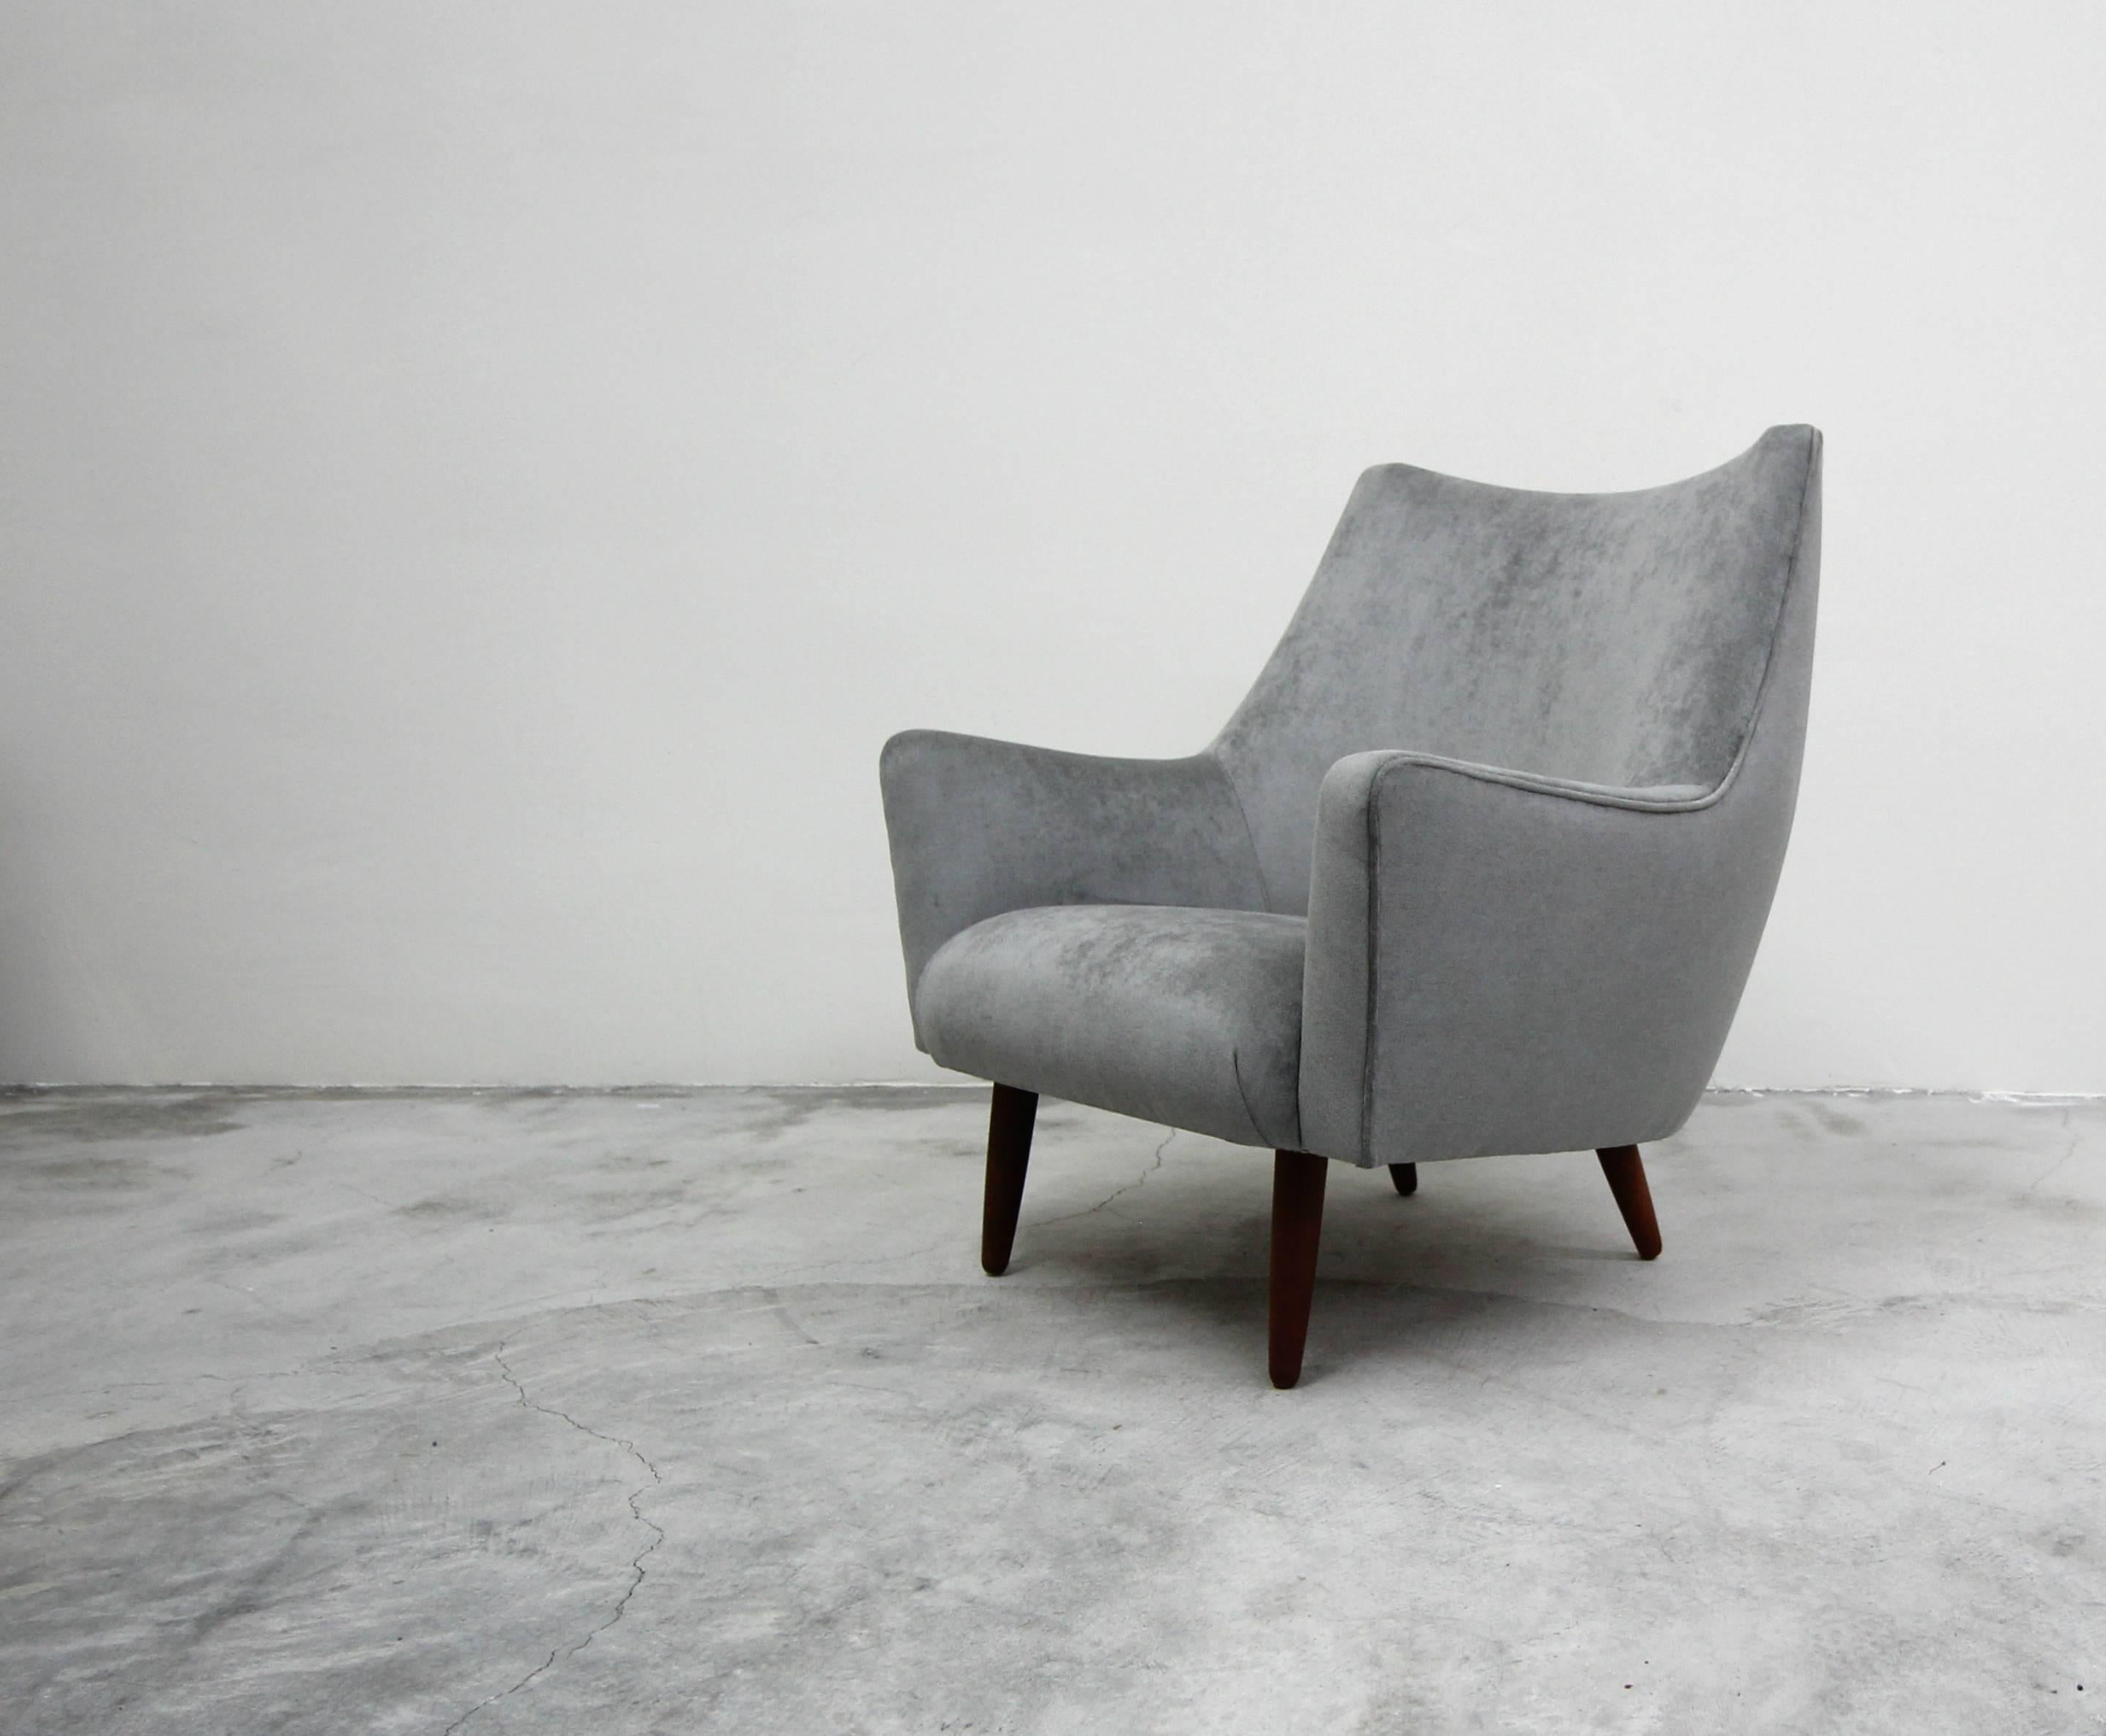 A beautiful midcentury Danish lounge chair. Large enough and stylish enough to stand alone, this gorgeous chair is the perfect one off chair for any room. Designed with Classic Danish craftsmanship, there's not a line that disappoints. Check out her